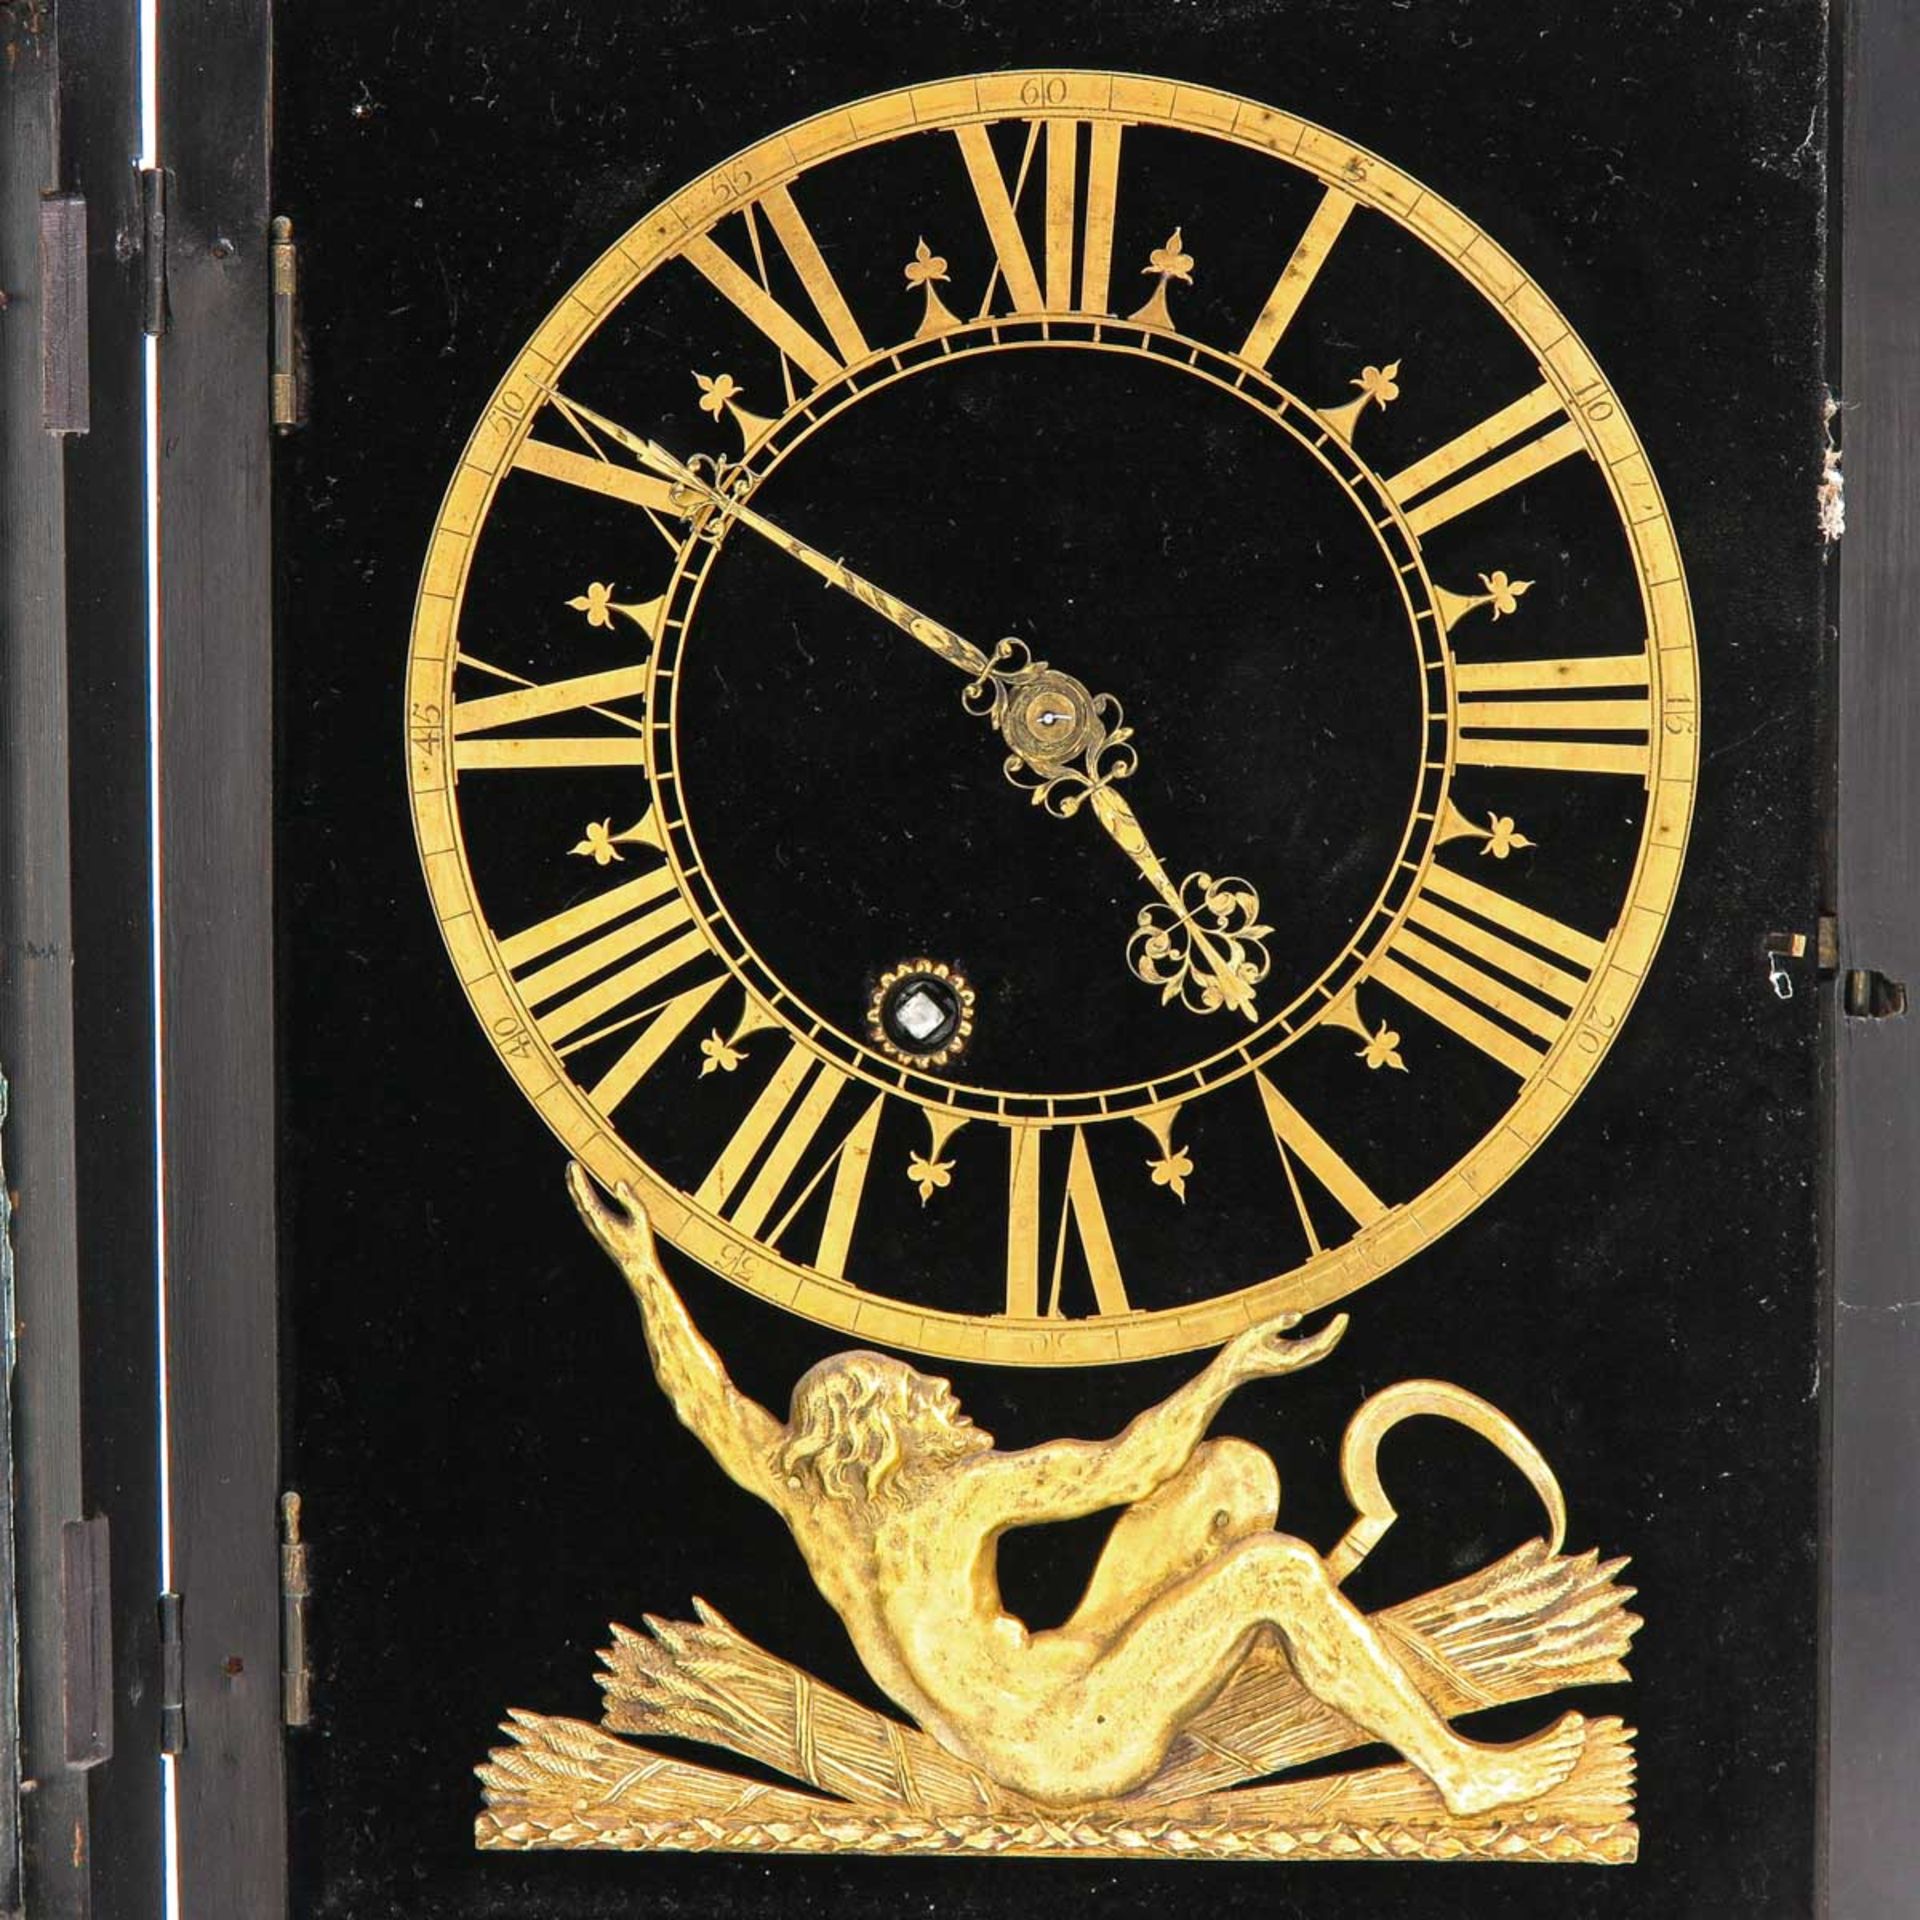 A 17th Century Hague Clock or Haagsche Klok Signed Pieter Visbagh - Image 6 of 9